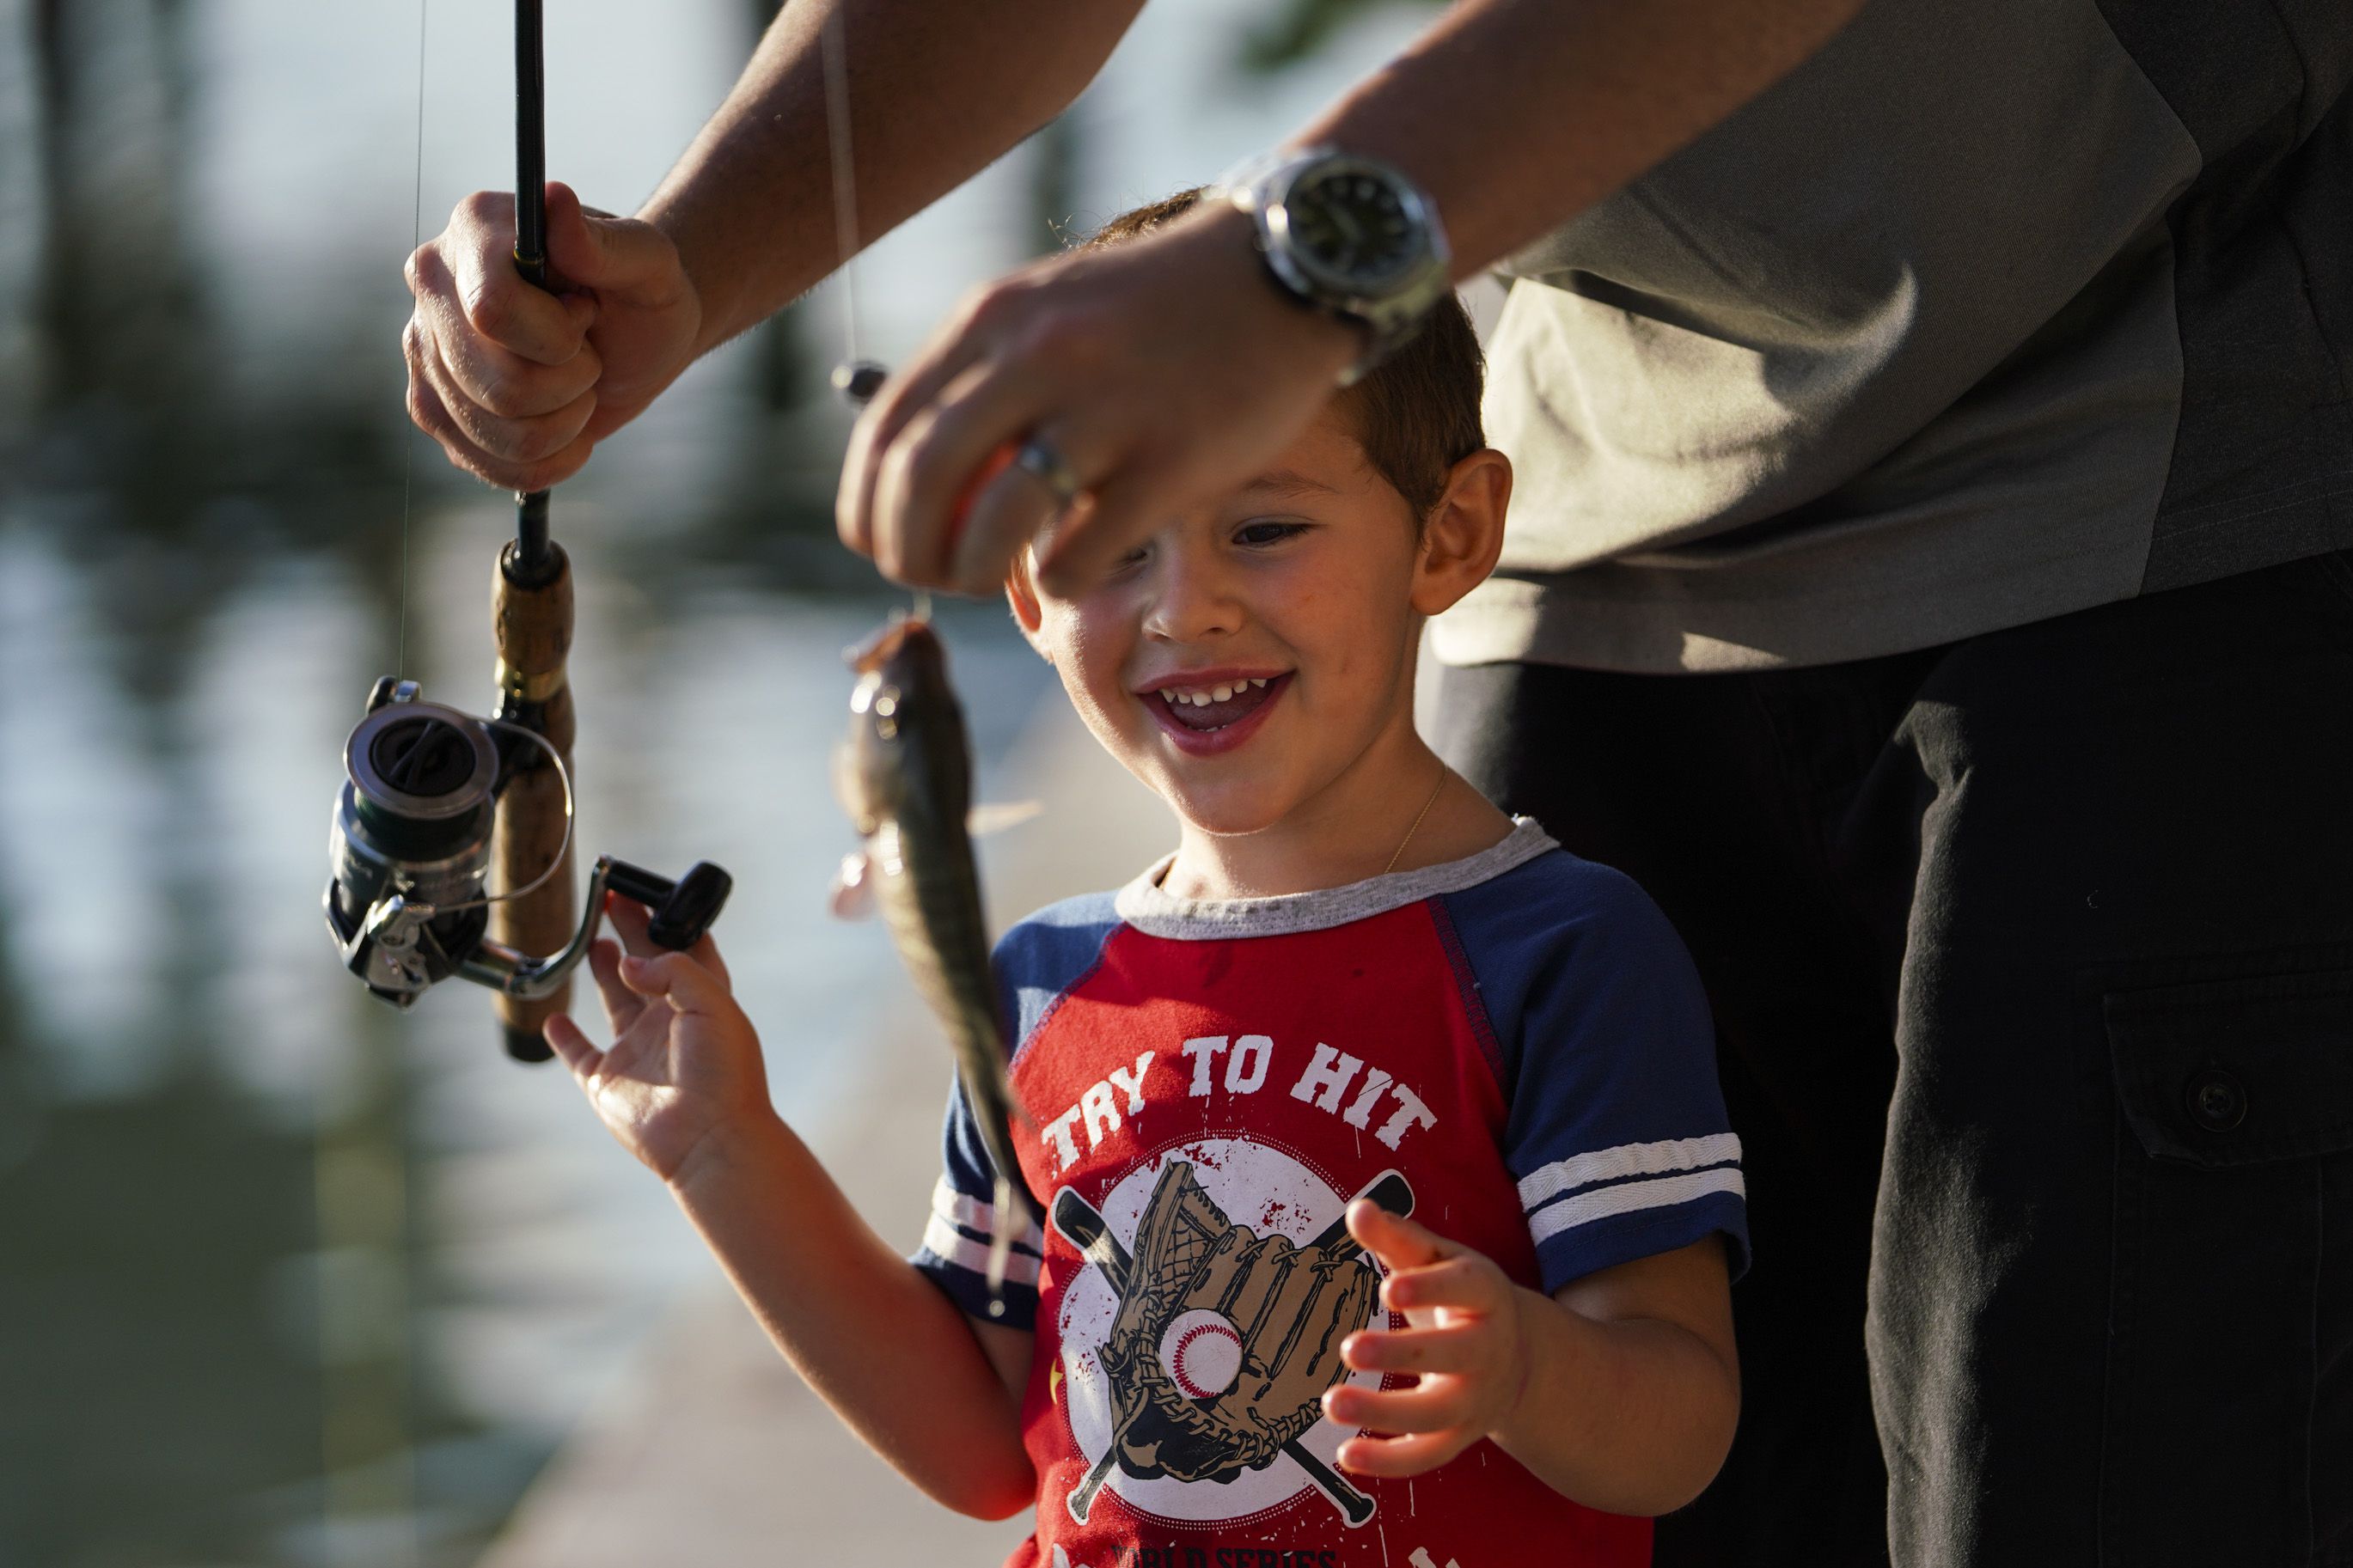 Fishing gives Tampa Bay residents peace in midst of pandemic